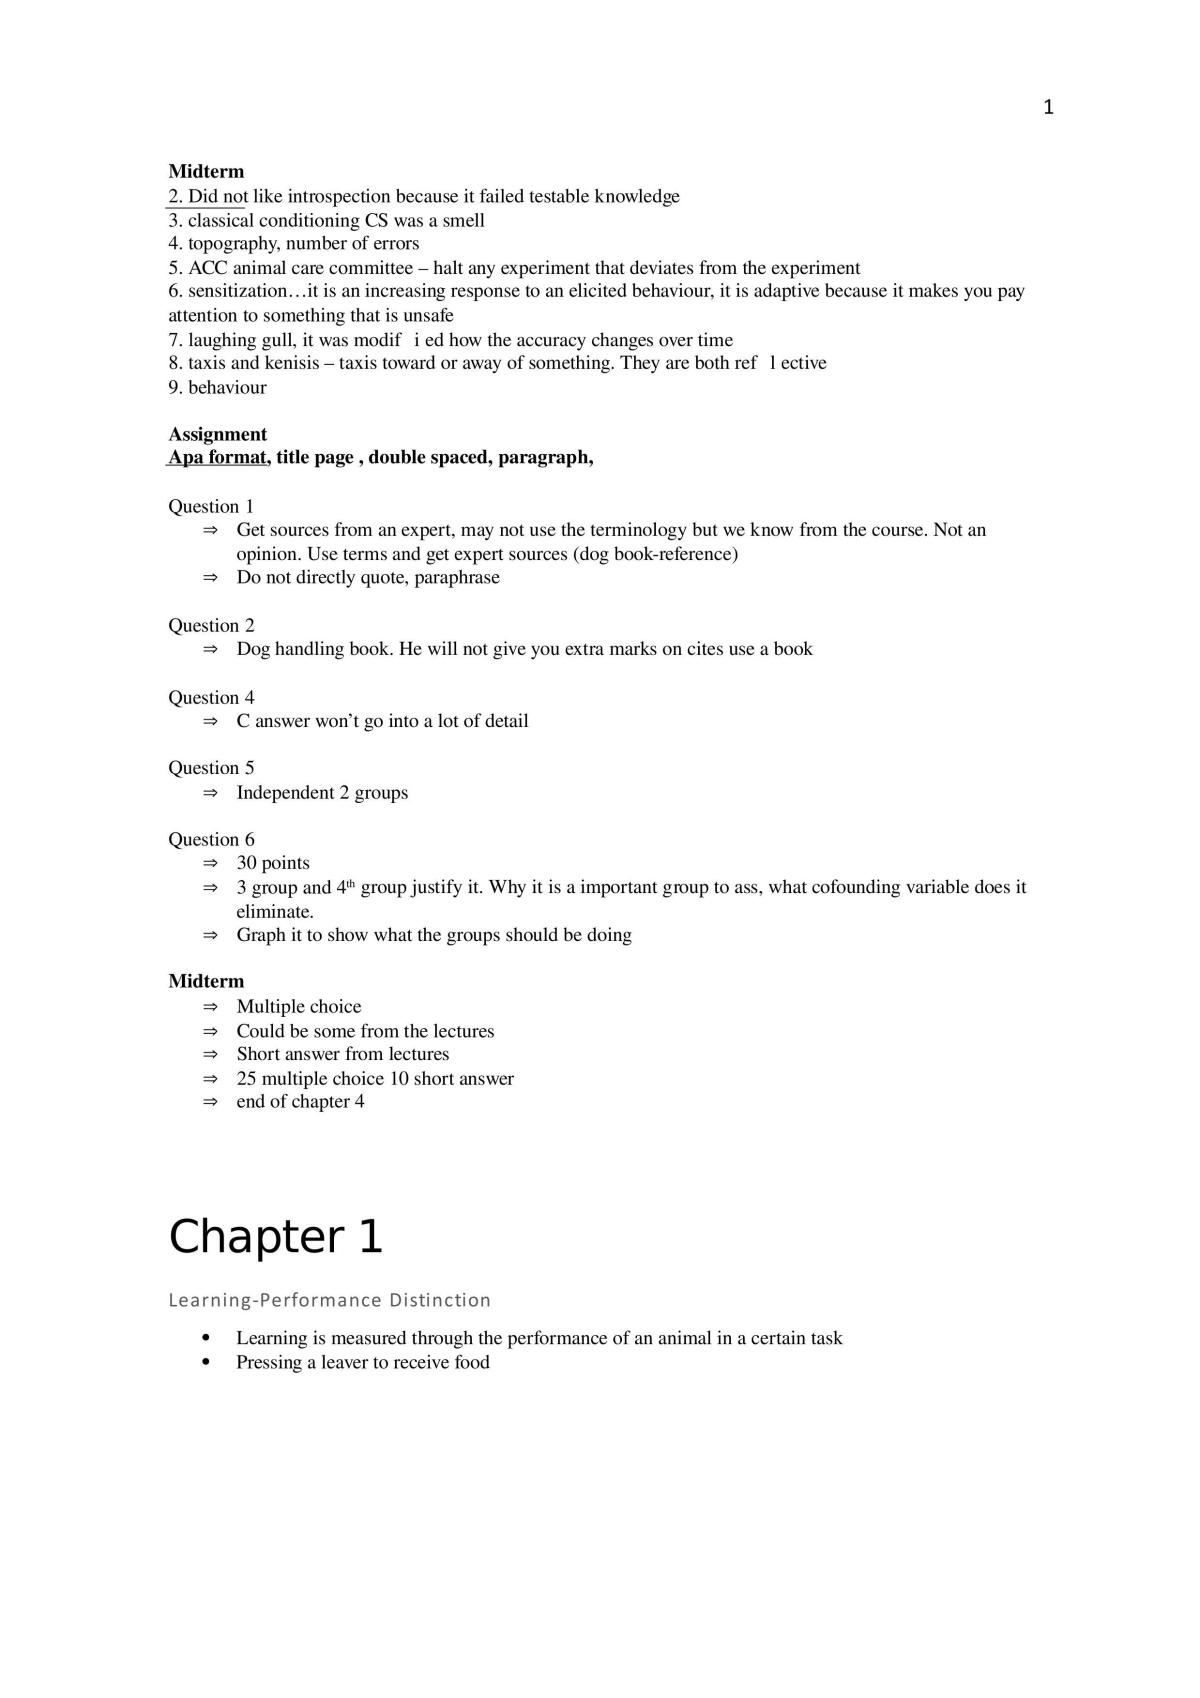 Learning Final Exam Notes - Page 1